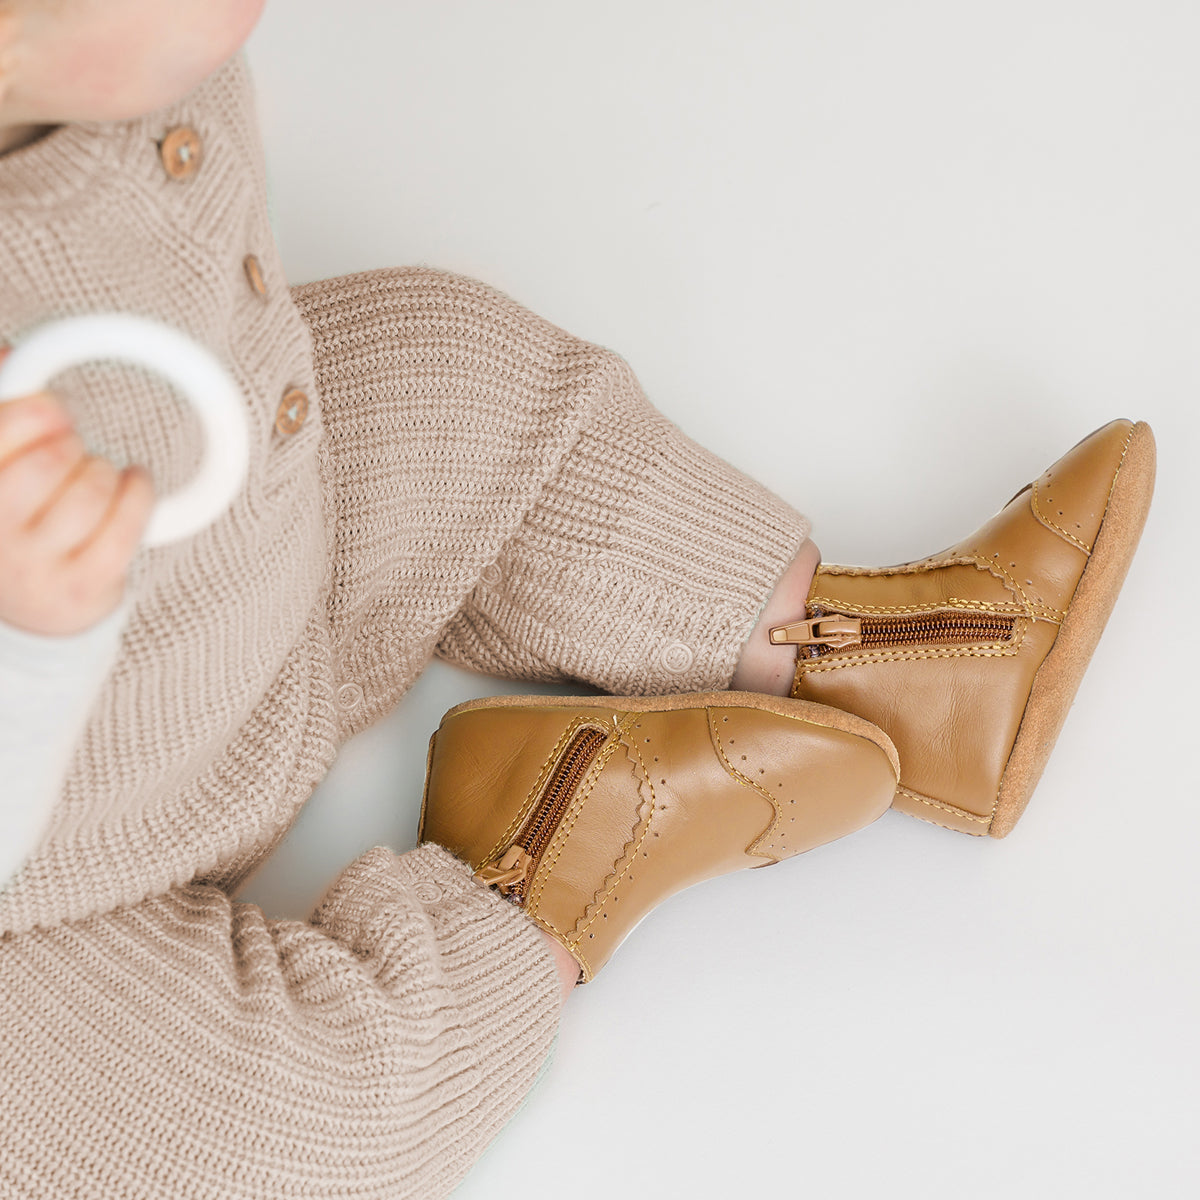 Baby wearing baby windsor boots in colour Tan, sitting on the floor